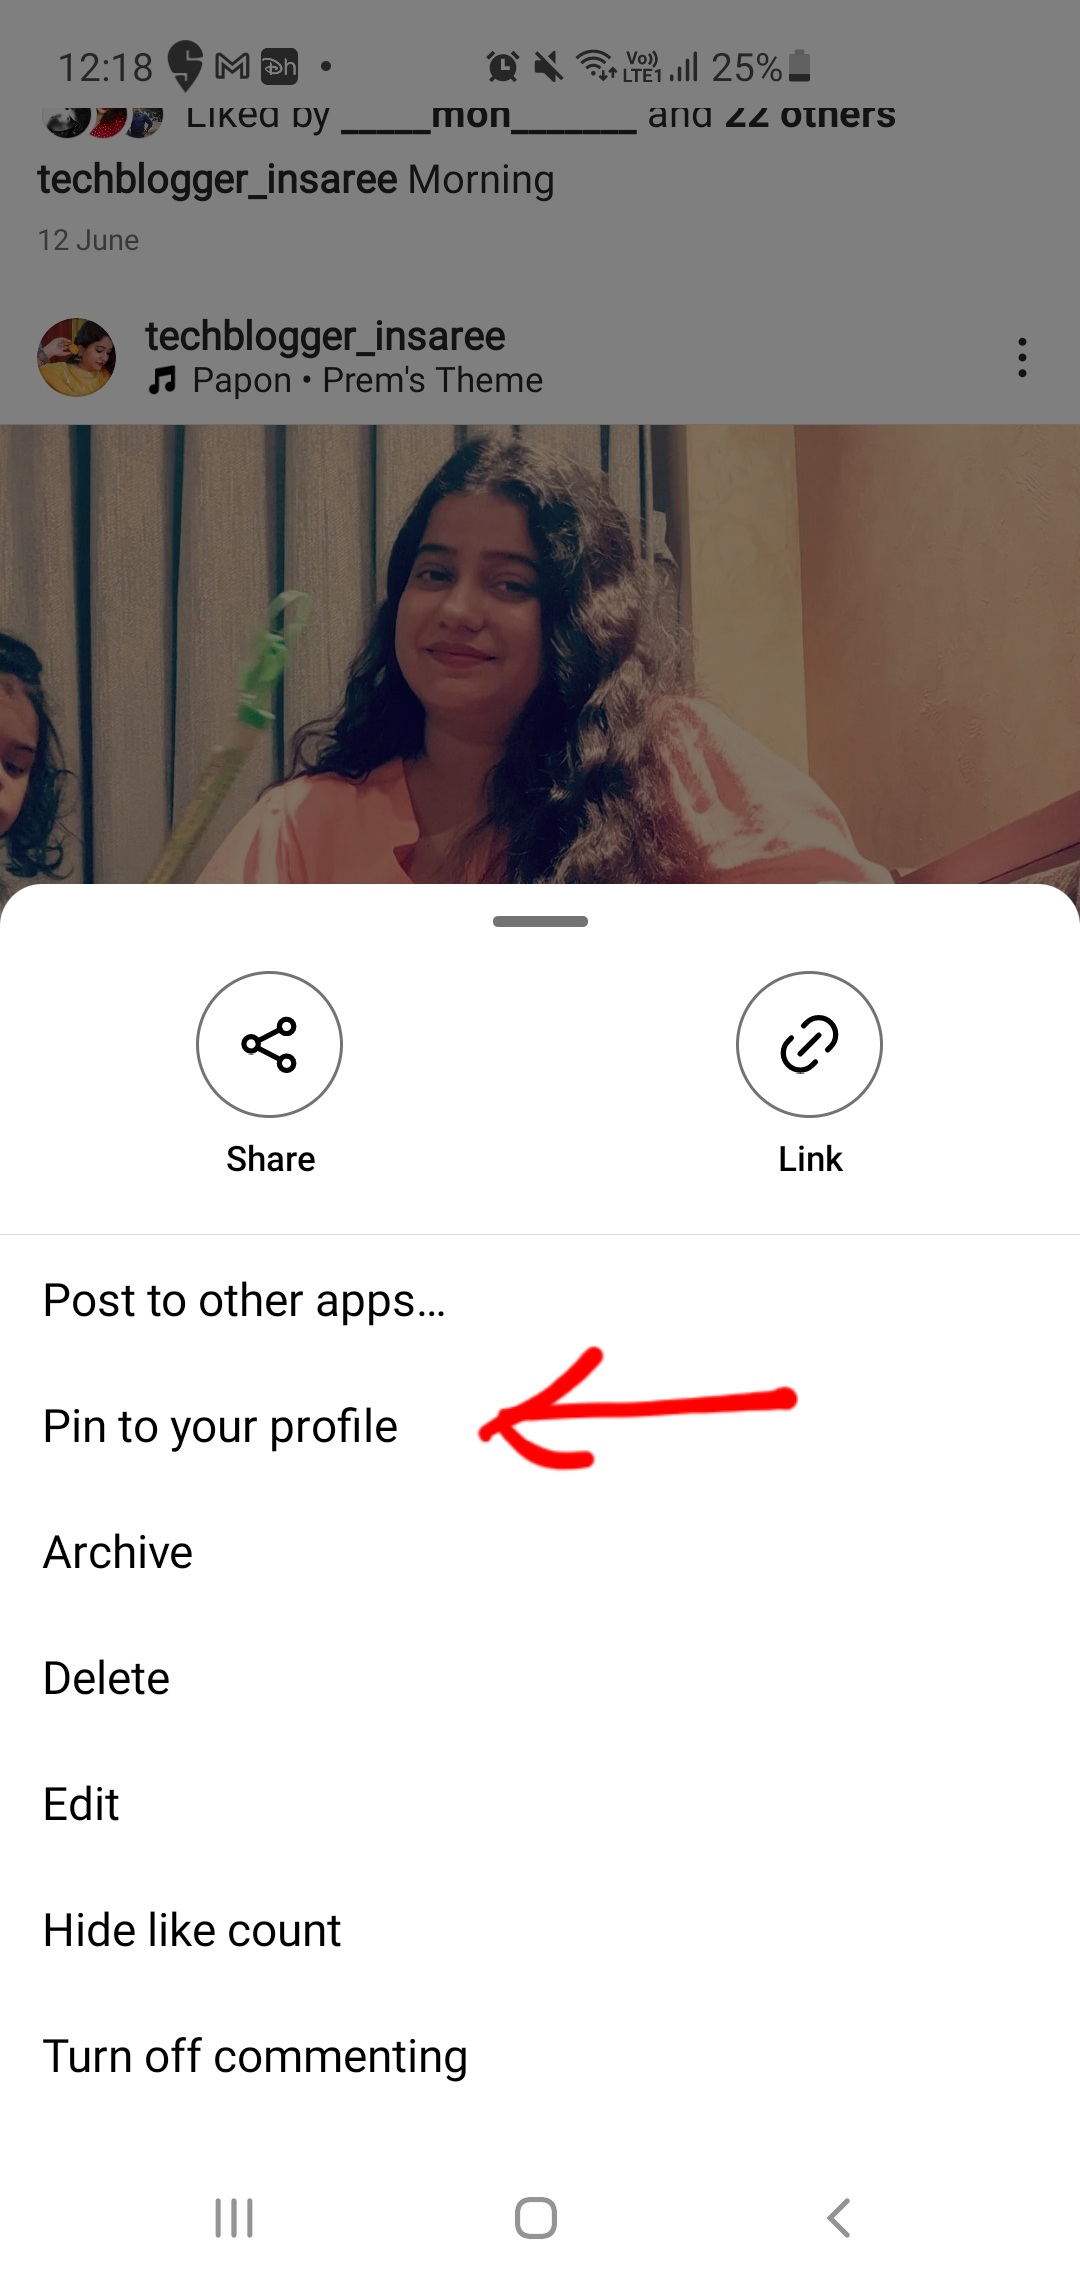 How To Pin A Post In Instagram?